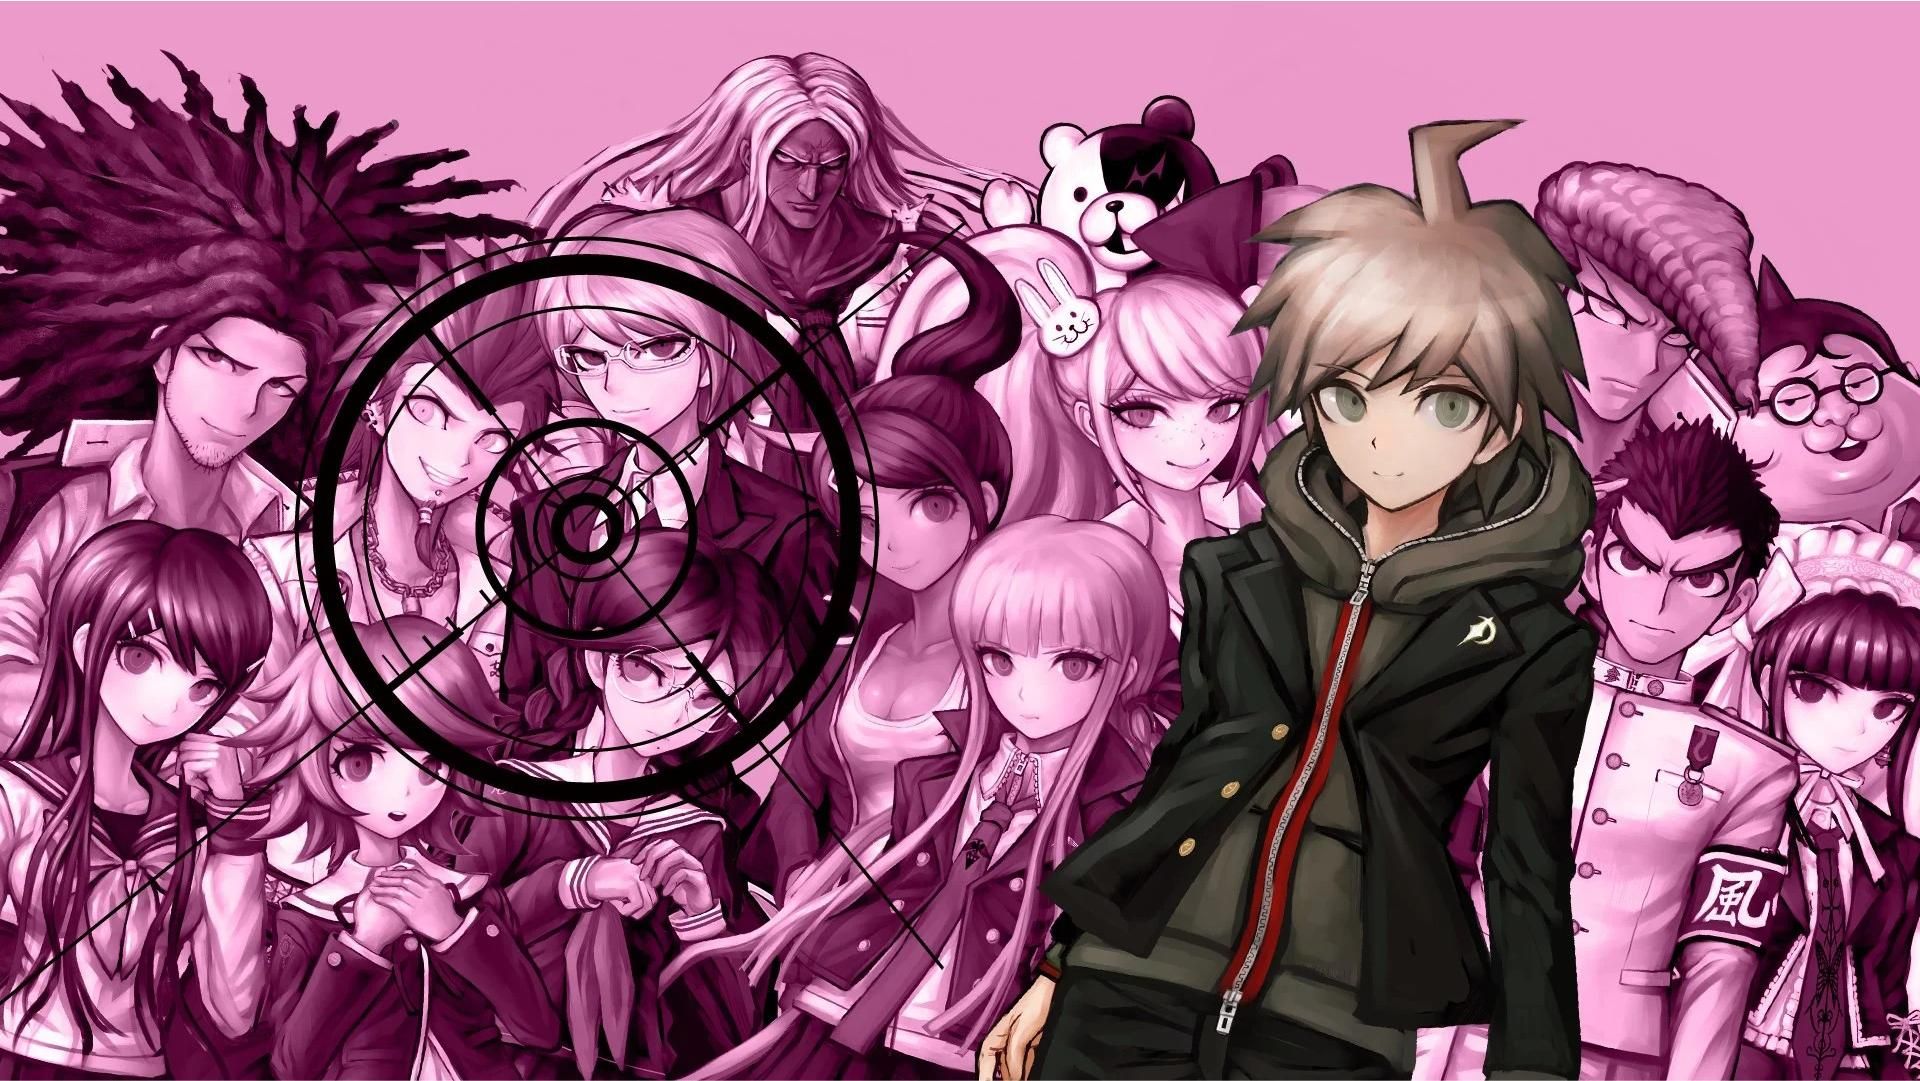 A stylized depiction of every character in Danganronpa: Trigger Happy Havoc.